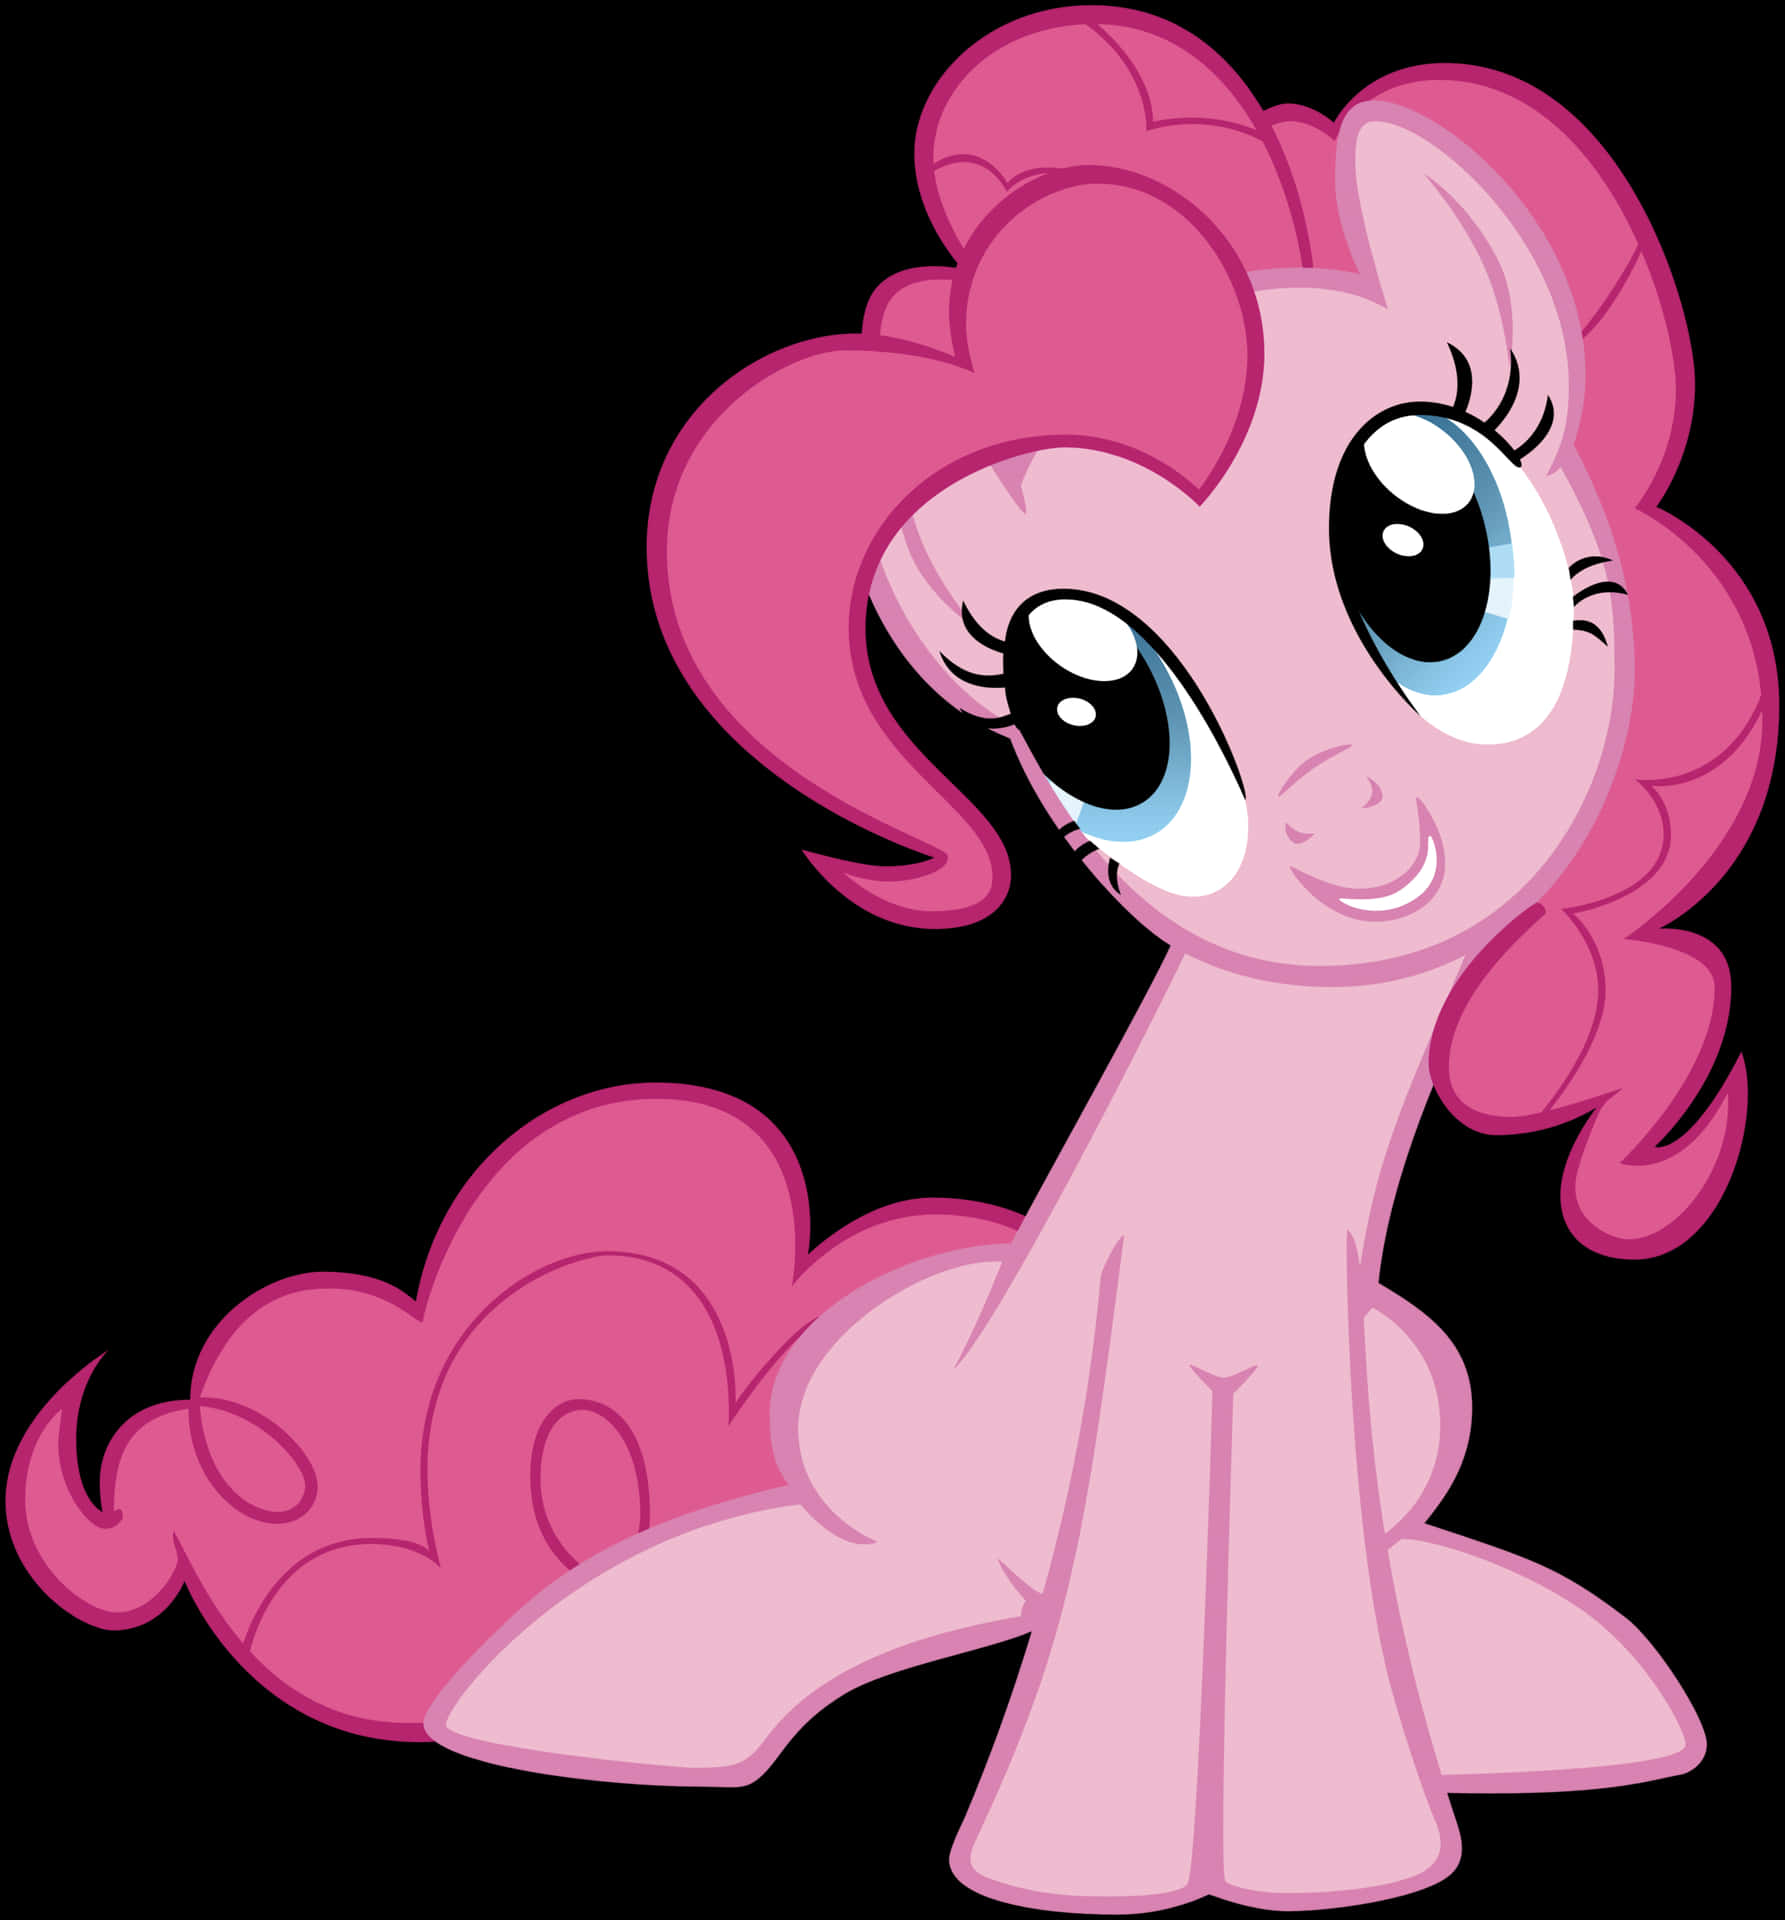 Download Pinkie Pie the bubbly and loving party pony